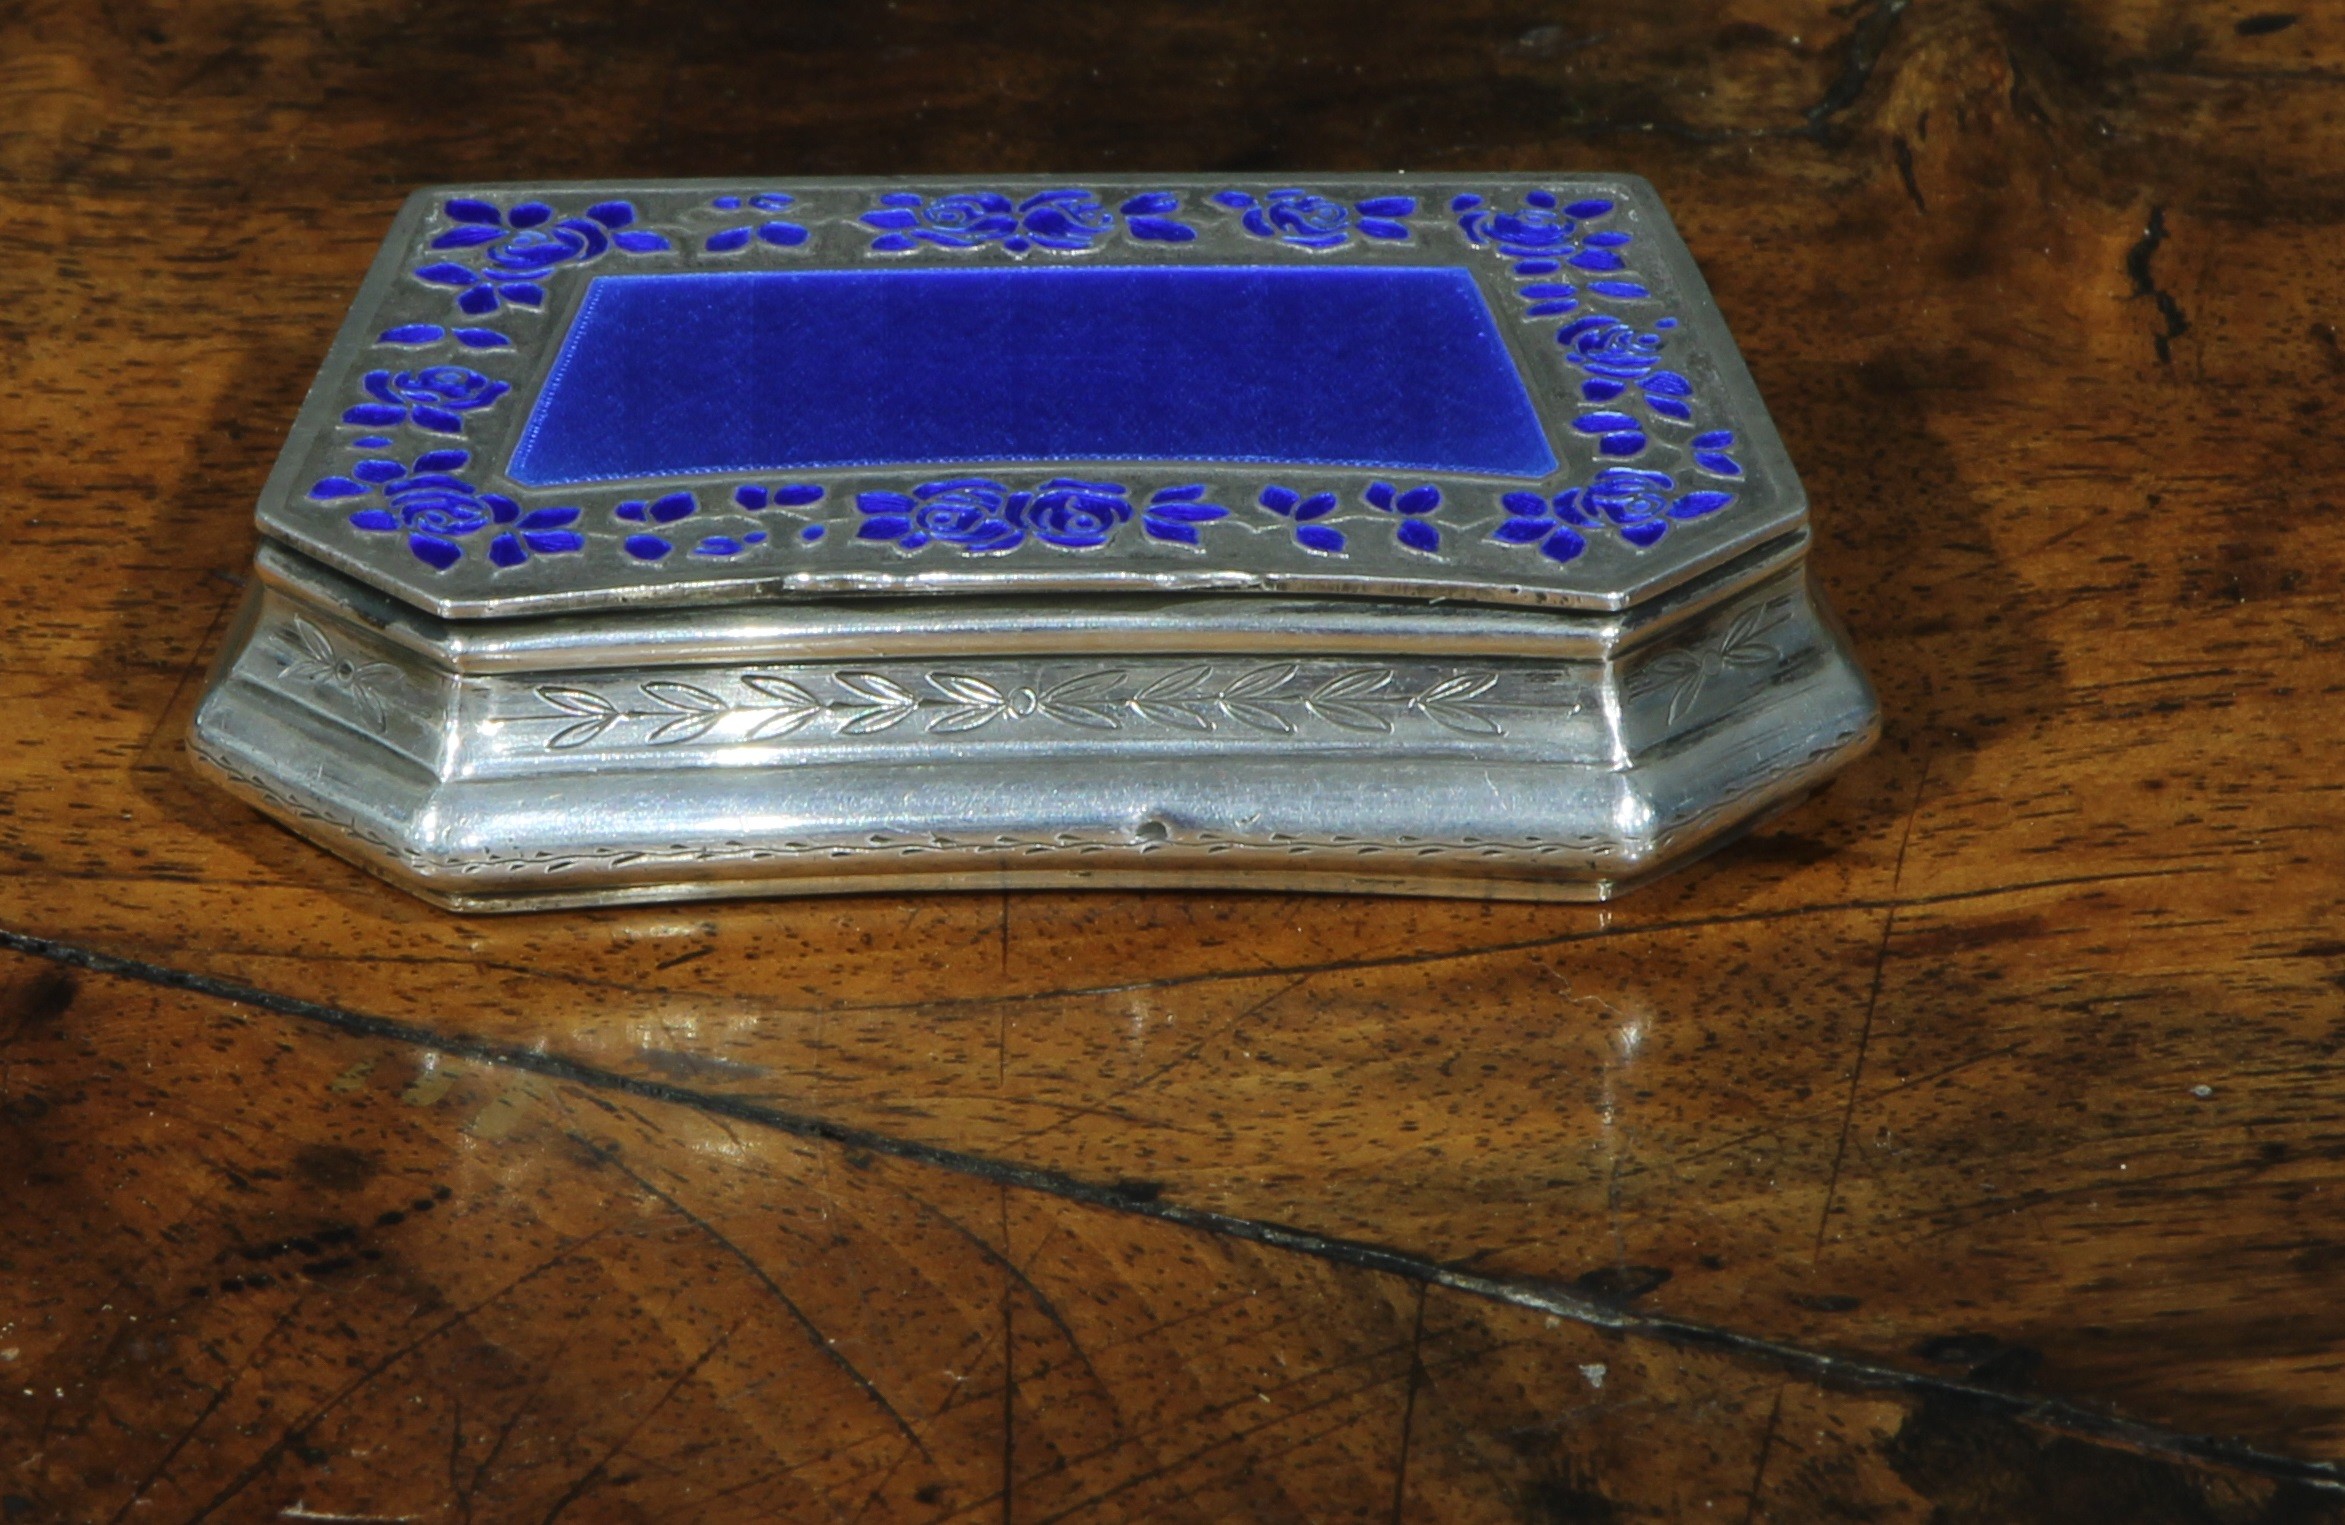 An early 20th century French silver and enamel lozenge shaped snuff box, hinged cover with blue